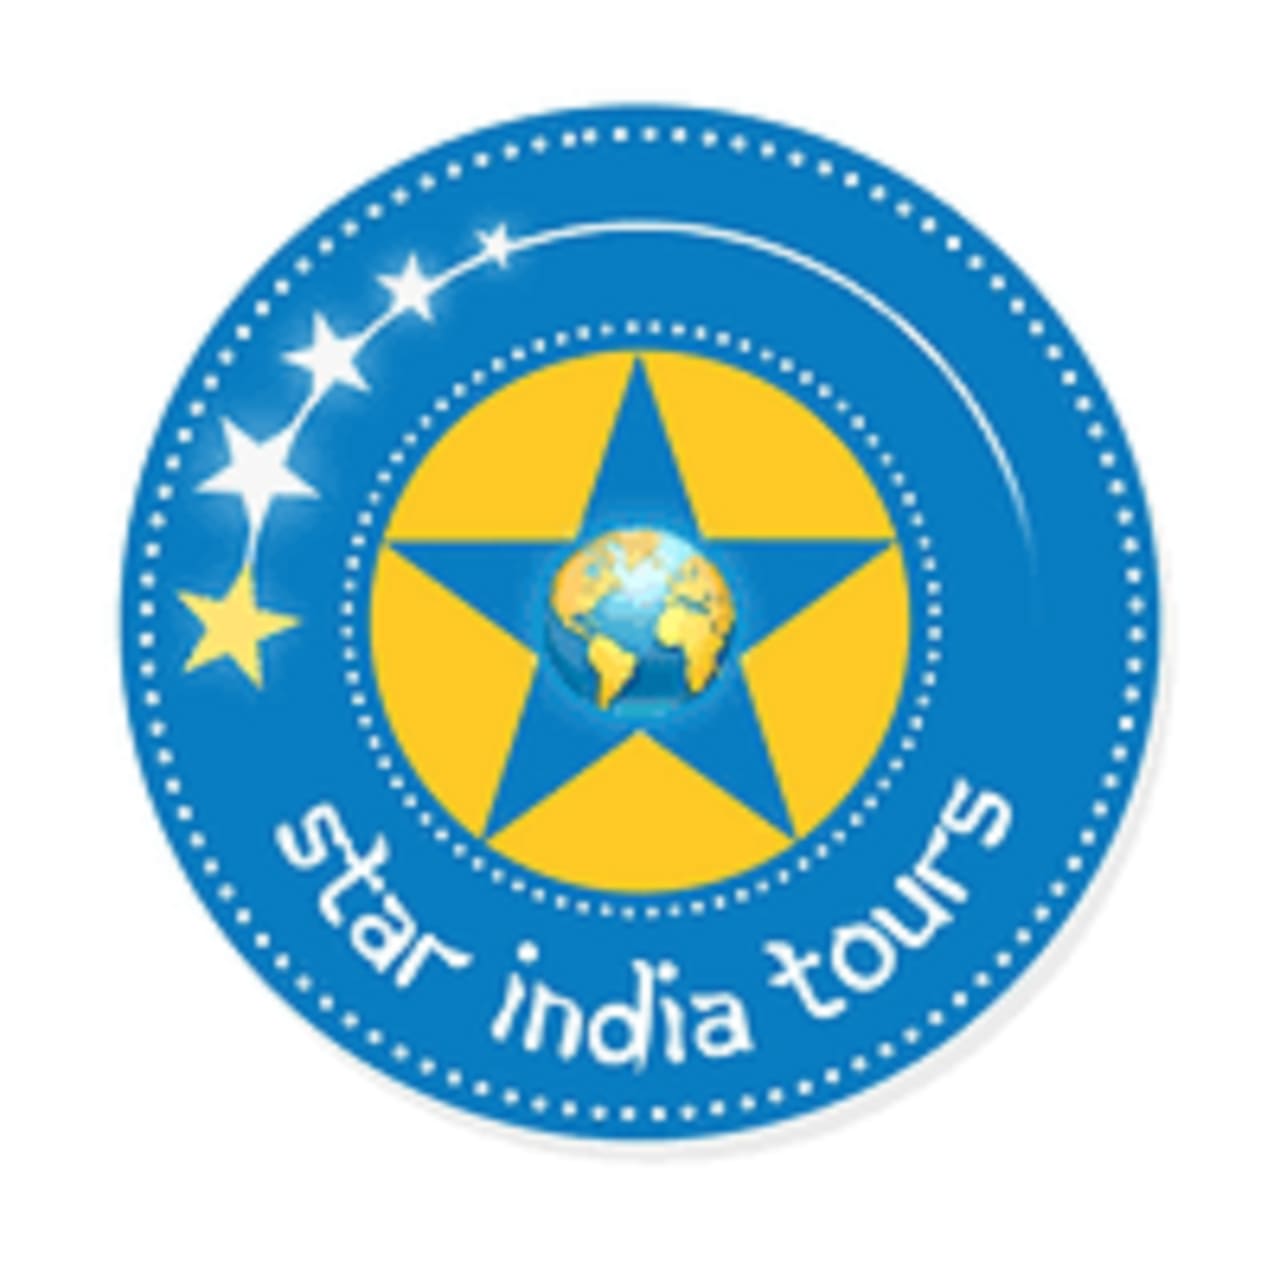 Star India Tours - Best Travel Agency and Tour Operators in Delhi, India